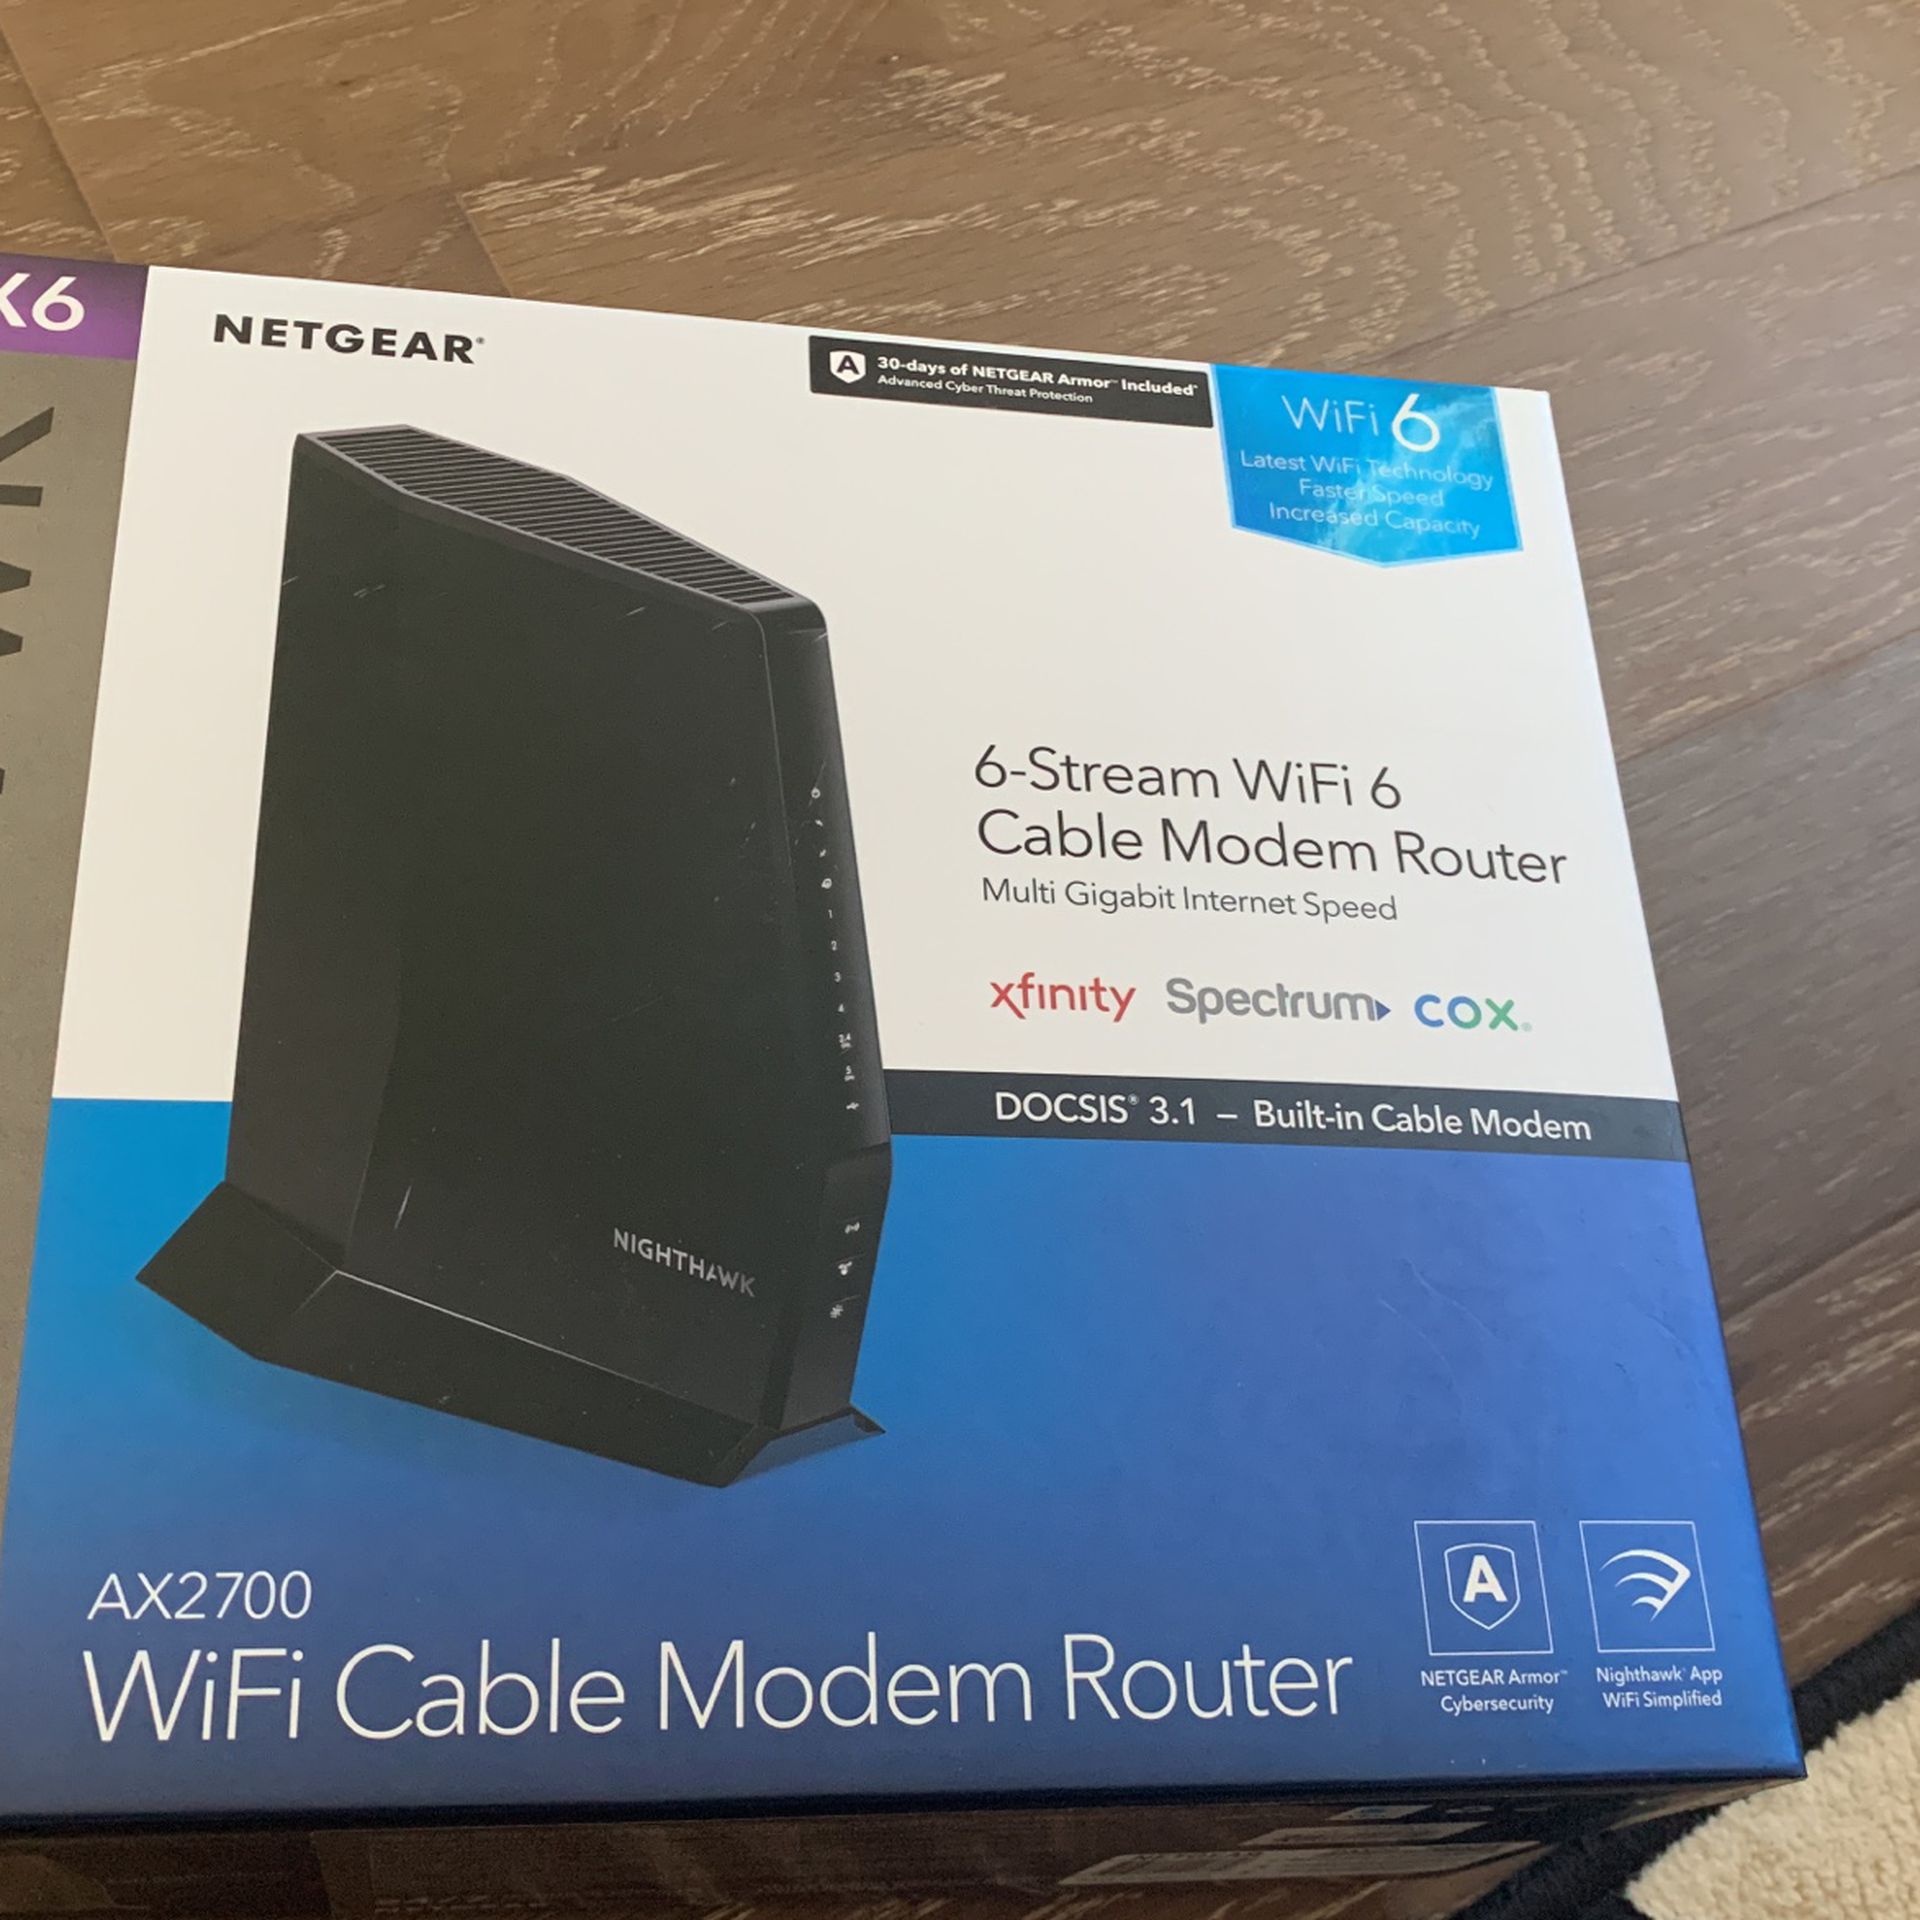 Nethear Nighthawk Cable Modem Router